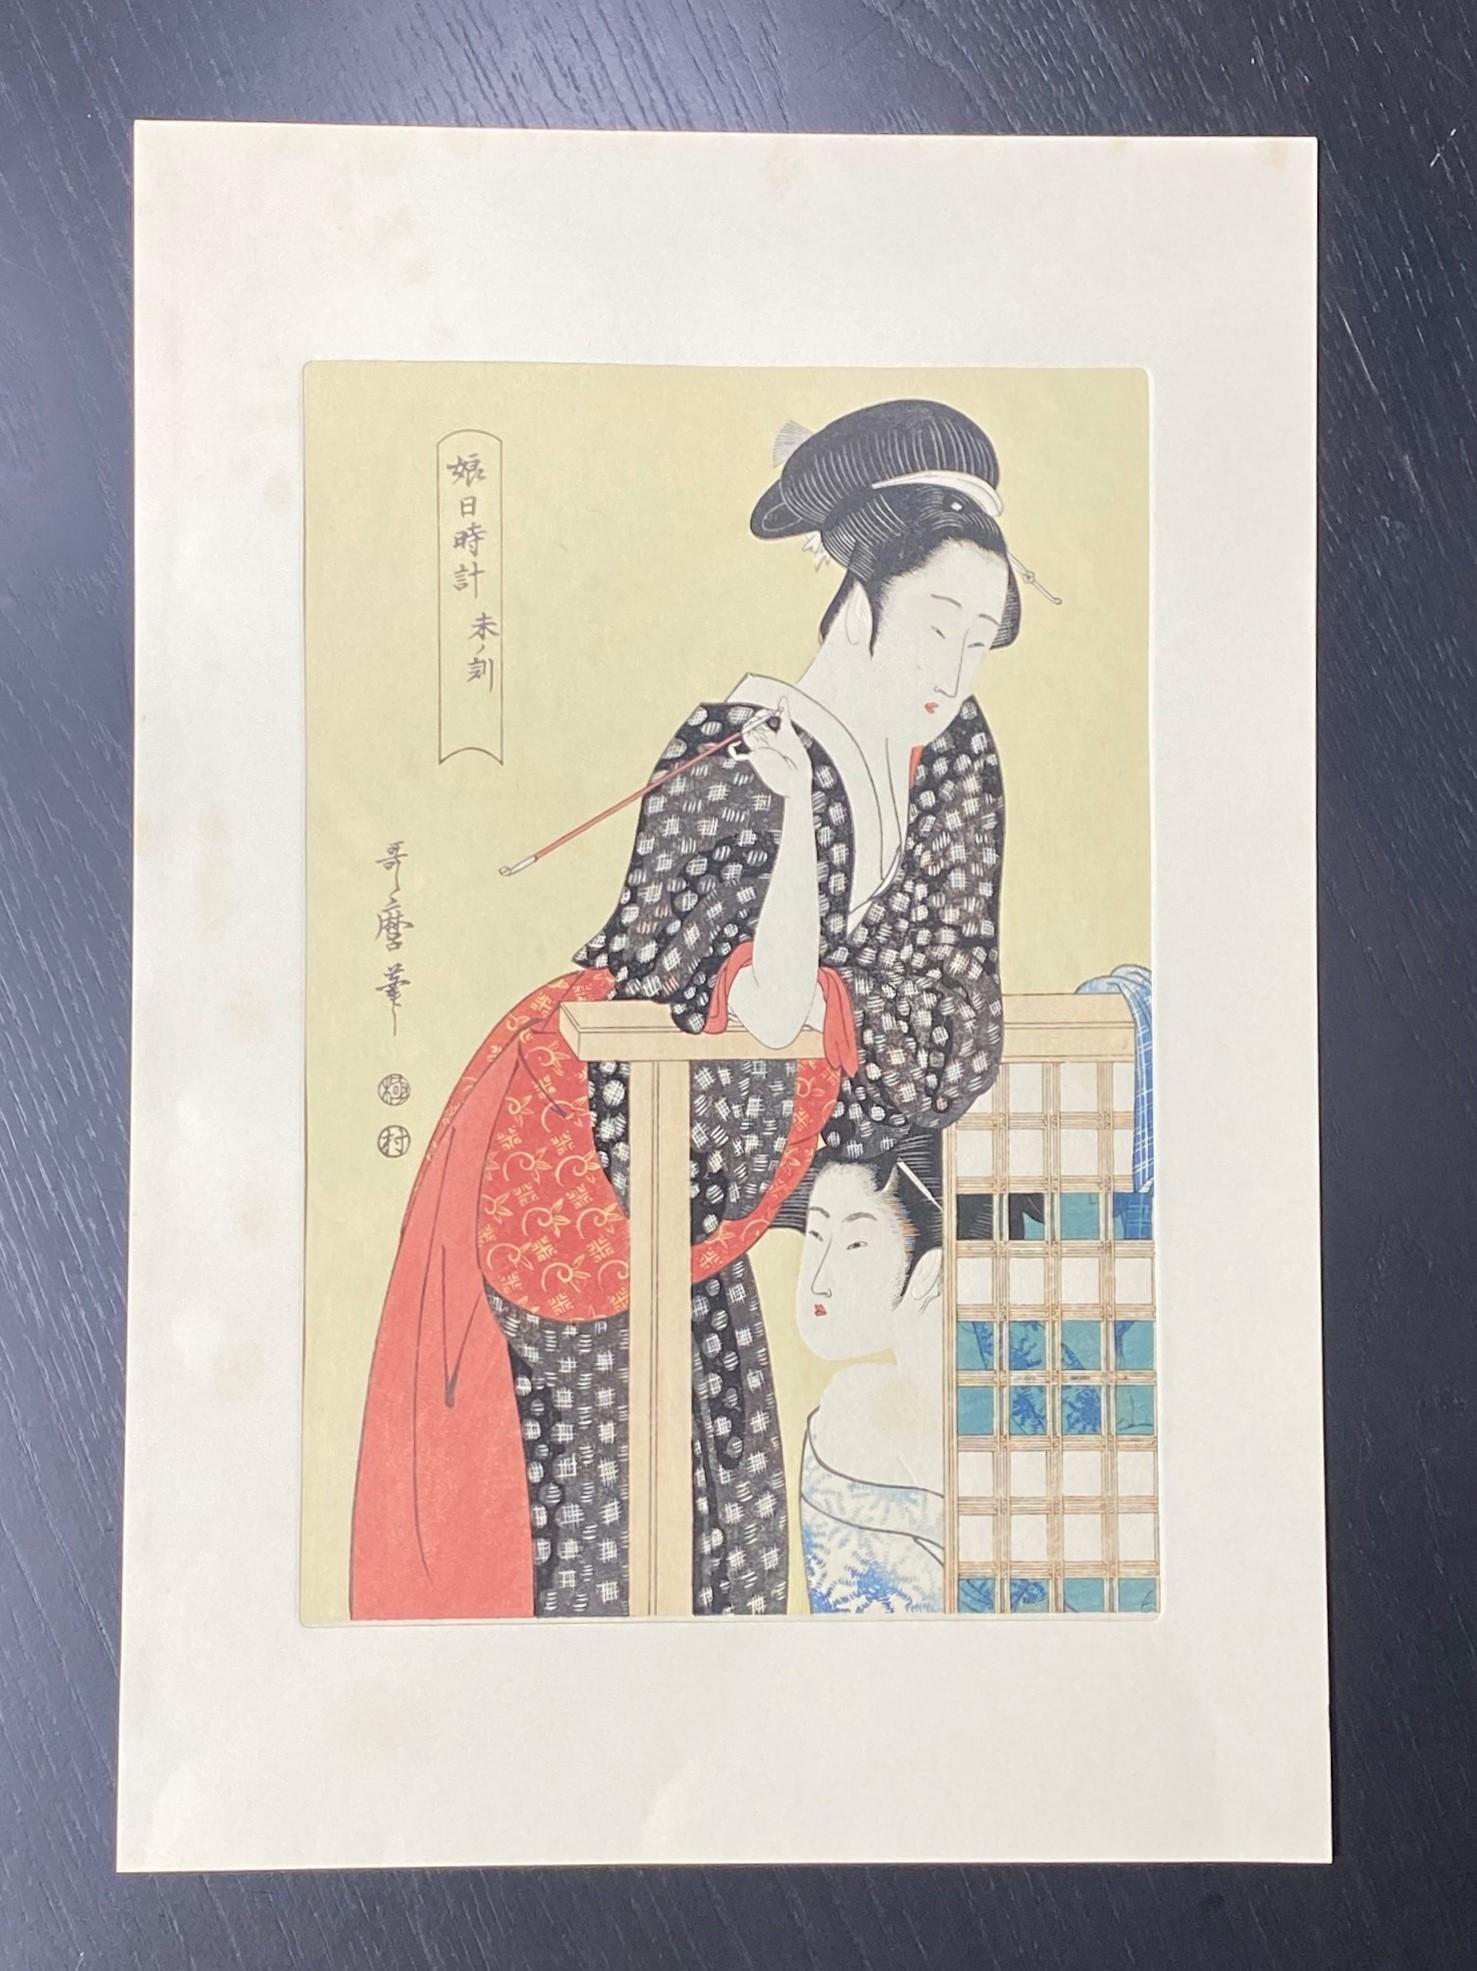 A beautifully composed and subtly colored Japanese woodblock print featuring two women, likely Geishas, with one leaning on a banister languidly with an opium pipe in hand.  This work is by Kitagawa Utamaro and is titled 